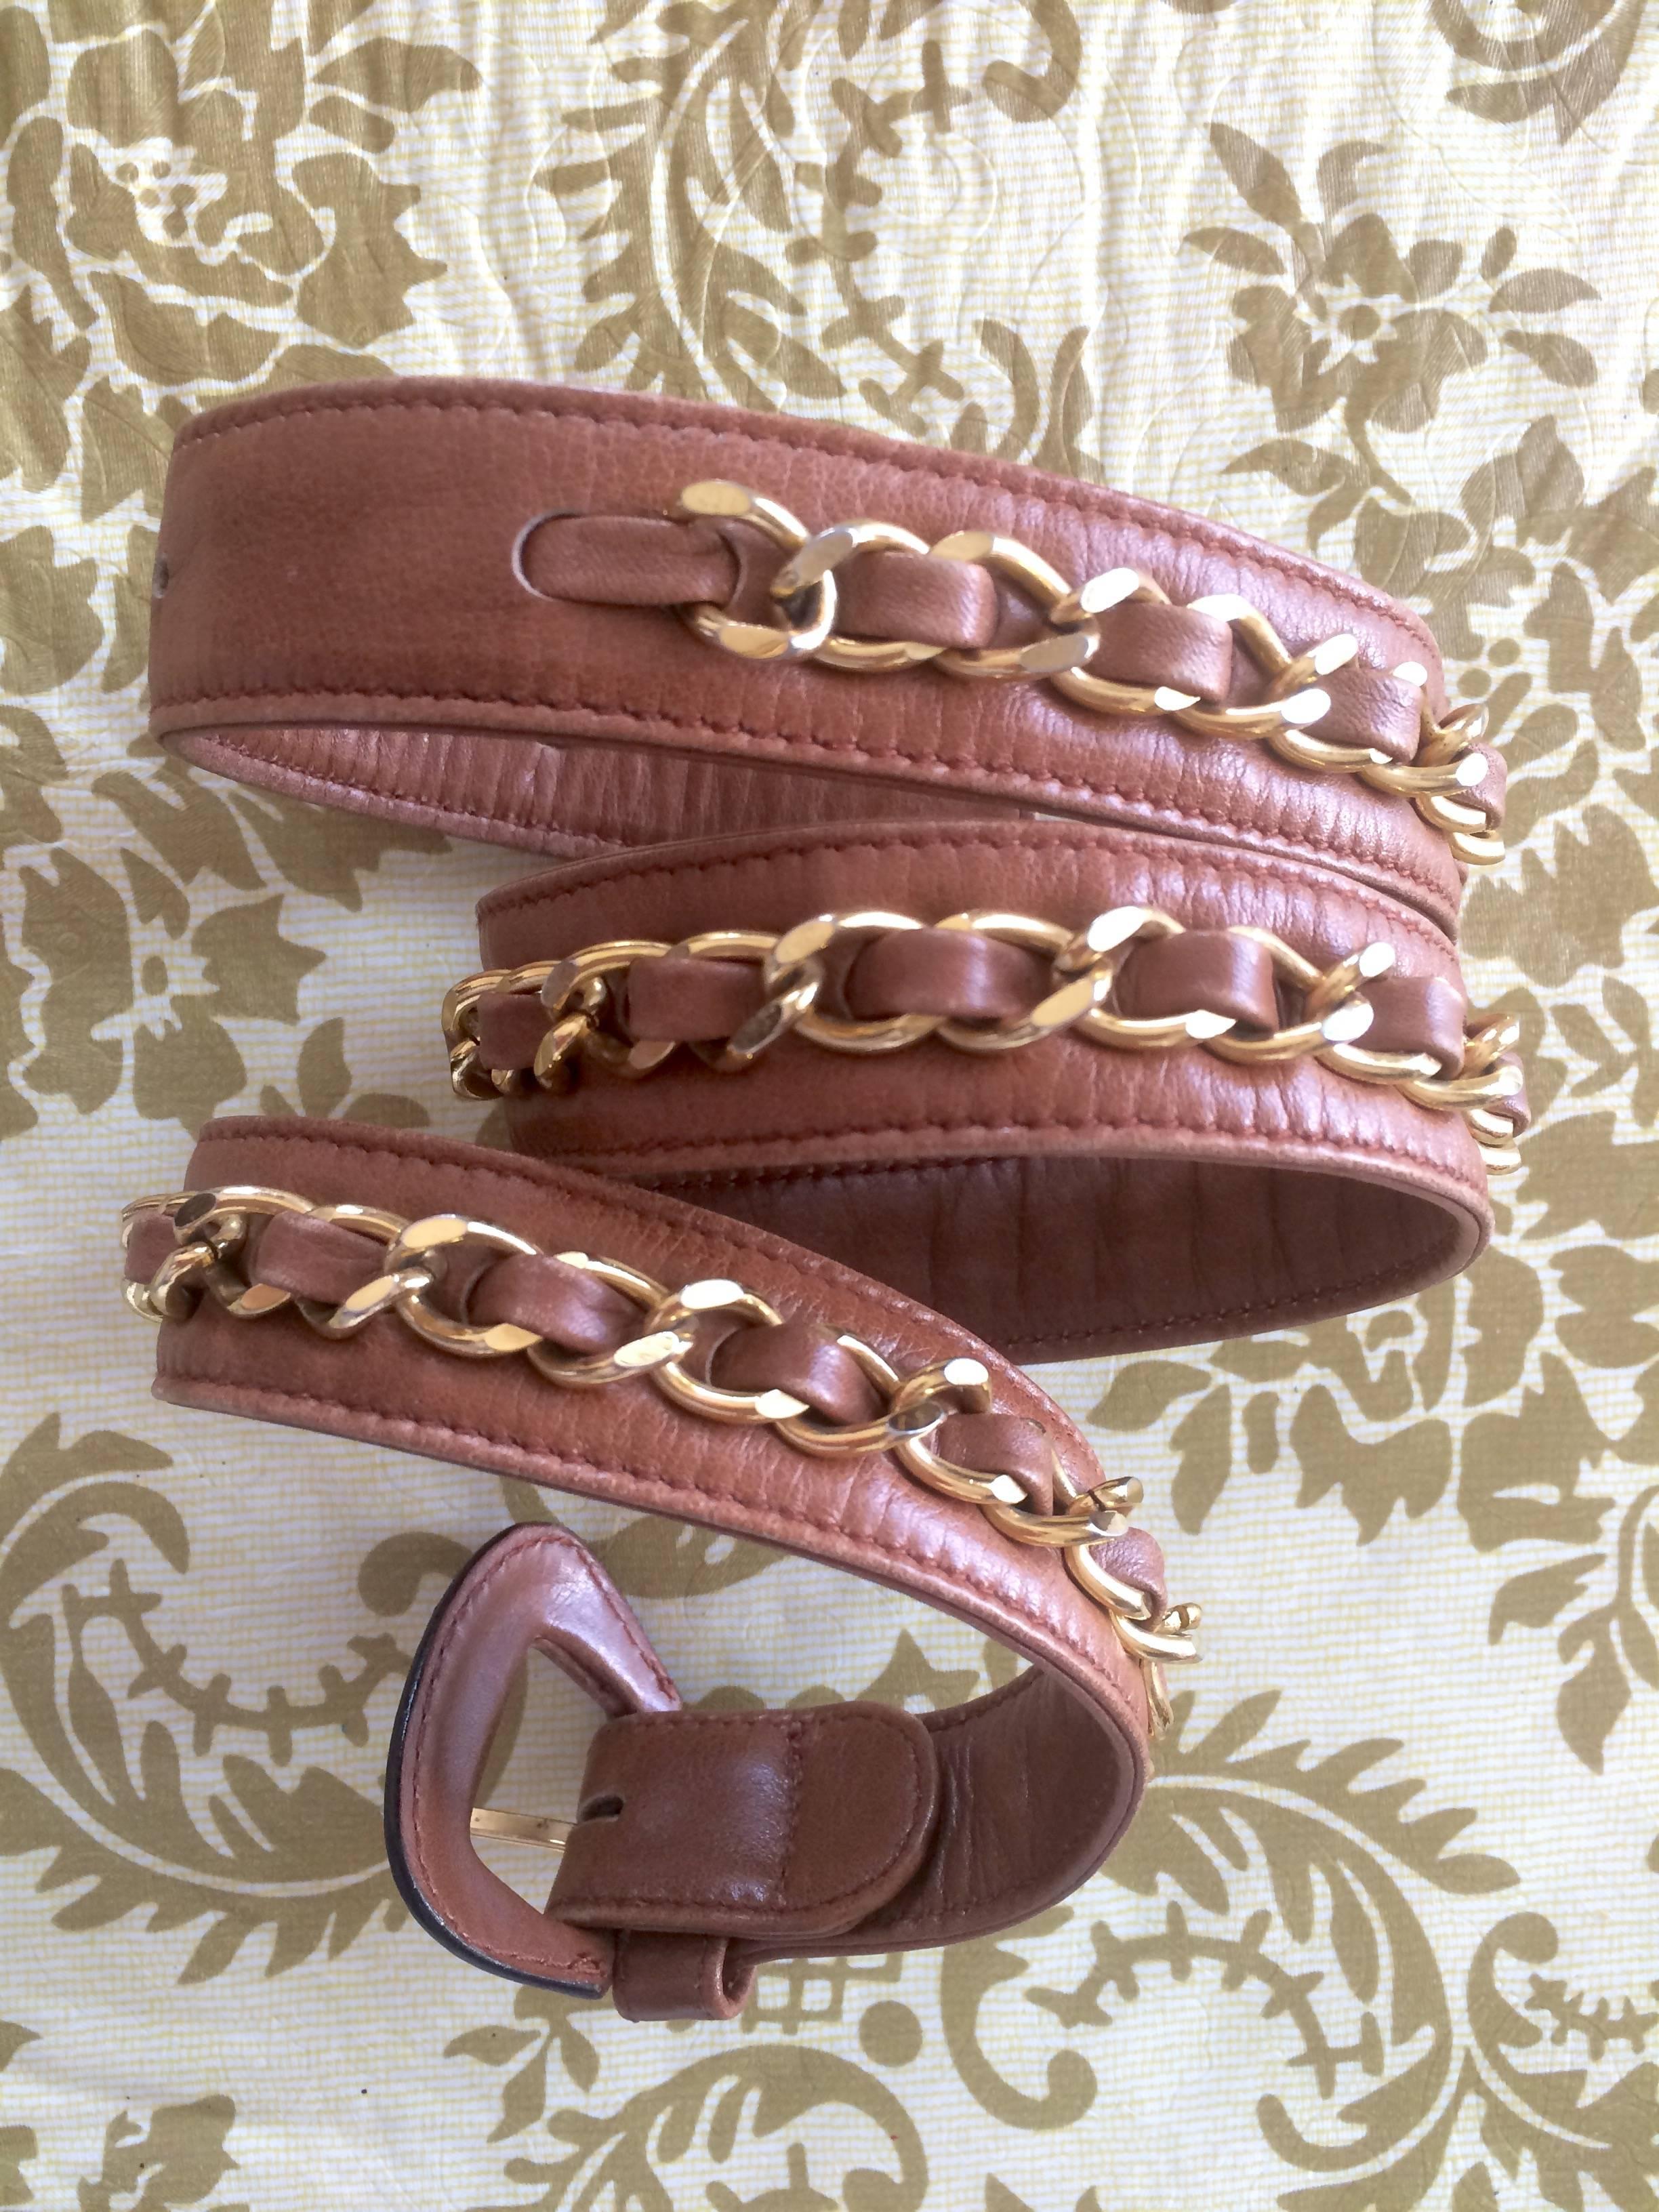 Women's or Men's Vintage CHANEL brown leather belt with gold tone chains. Good for fanny pack too For Sale